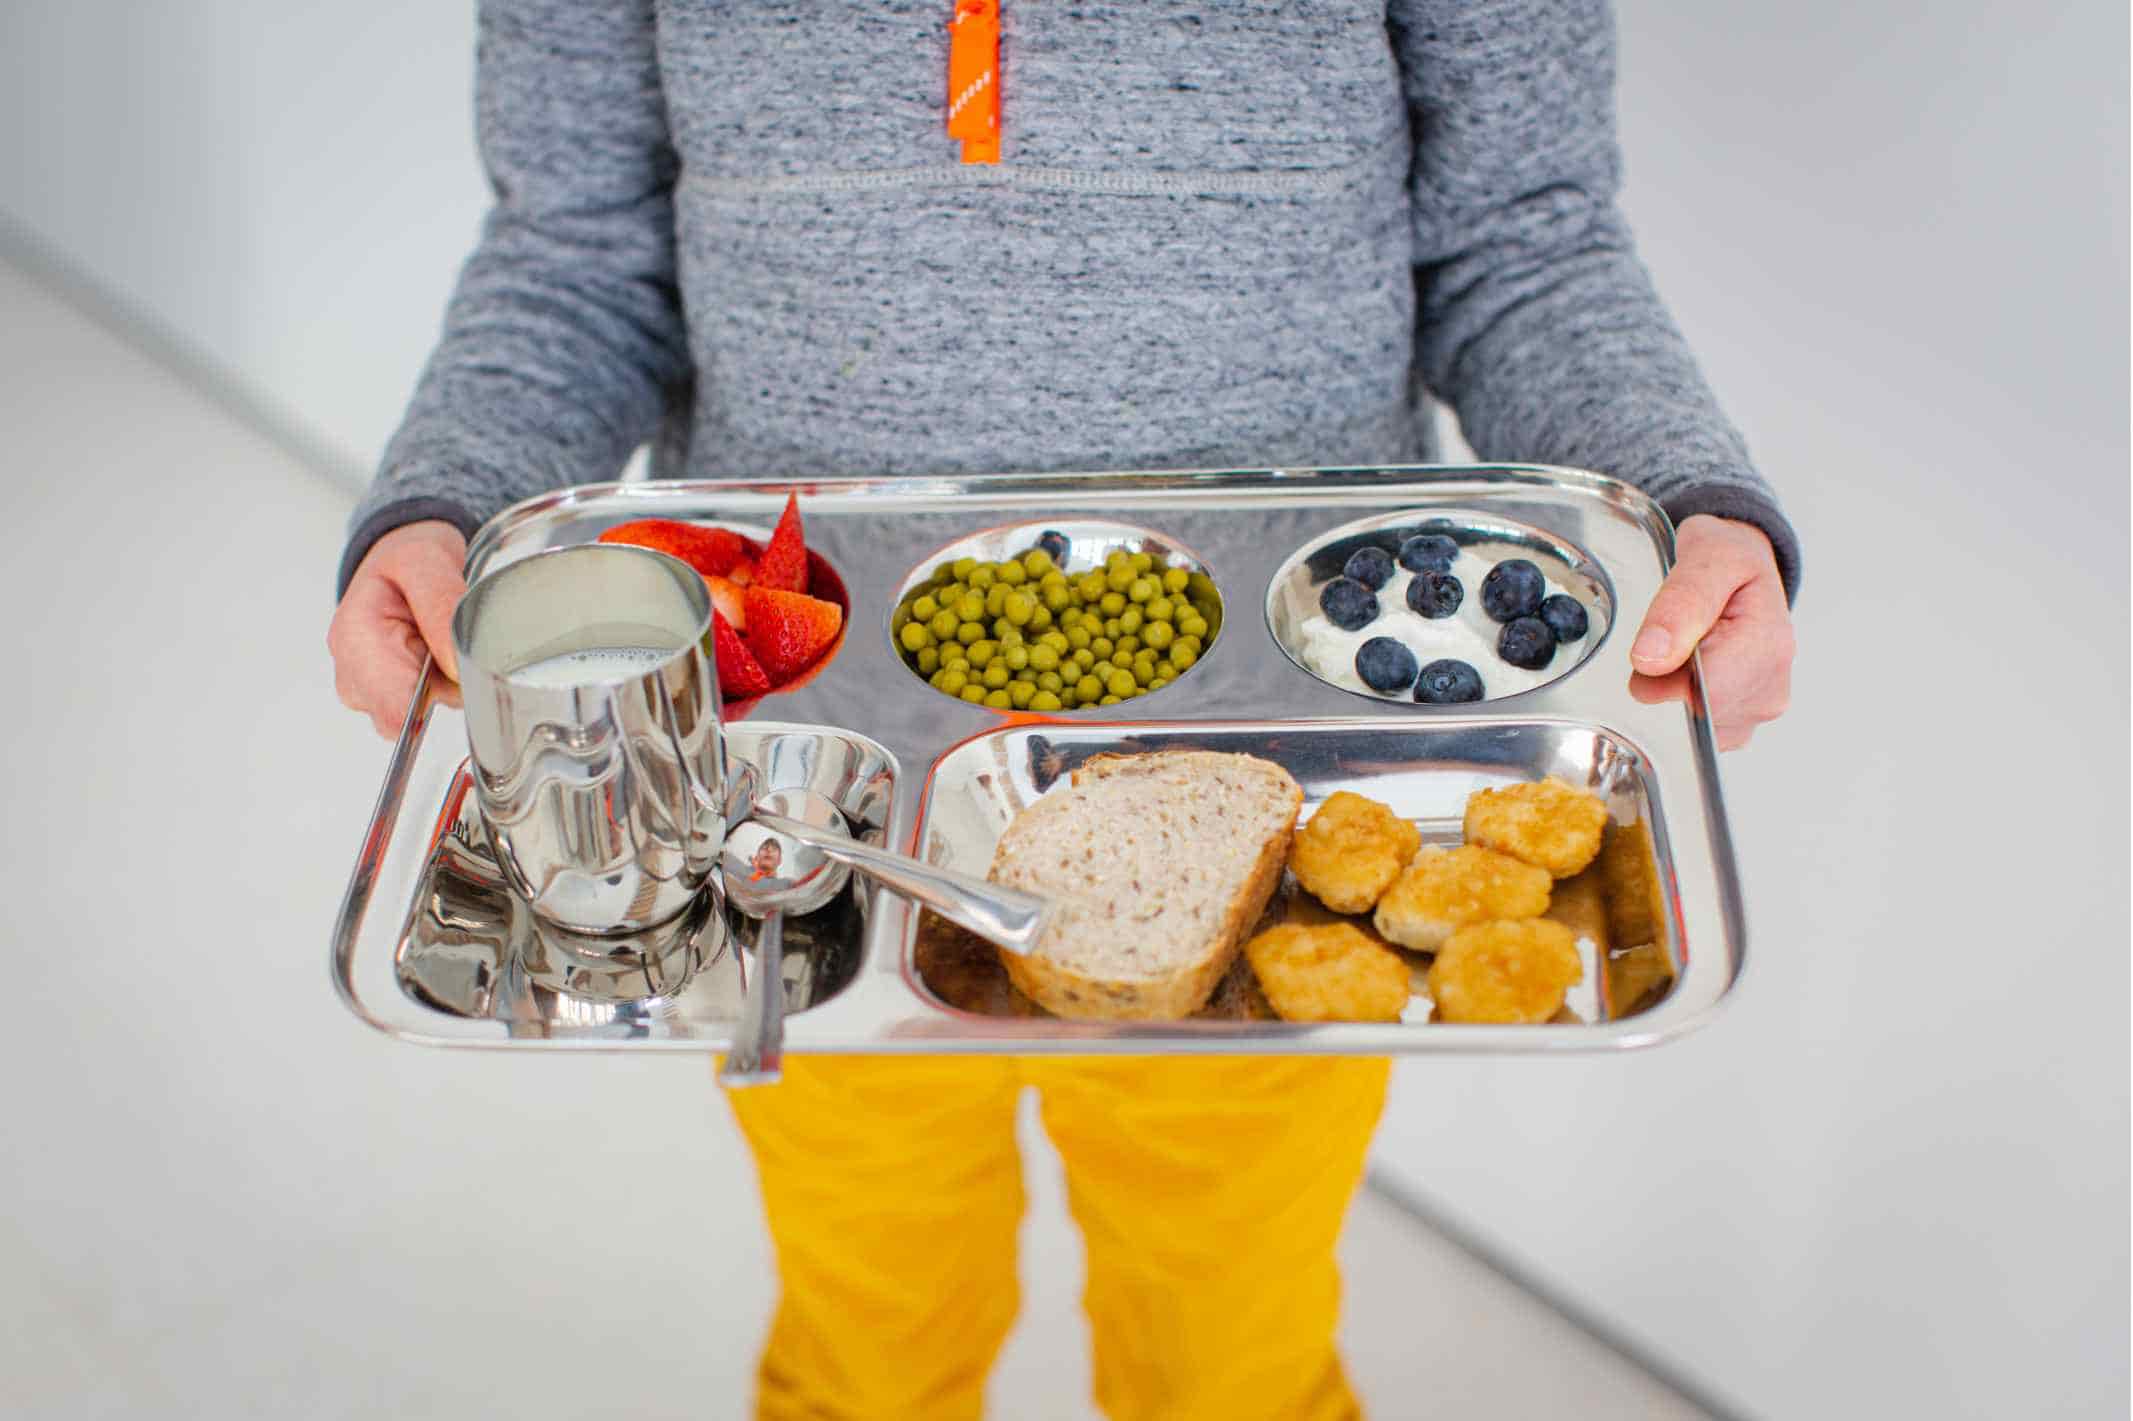 Creative Uses for Cafeteria Trays | Child Holding Lunch Tray